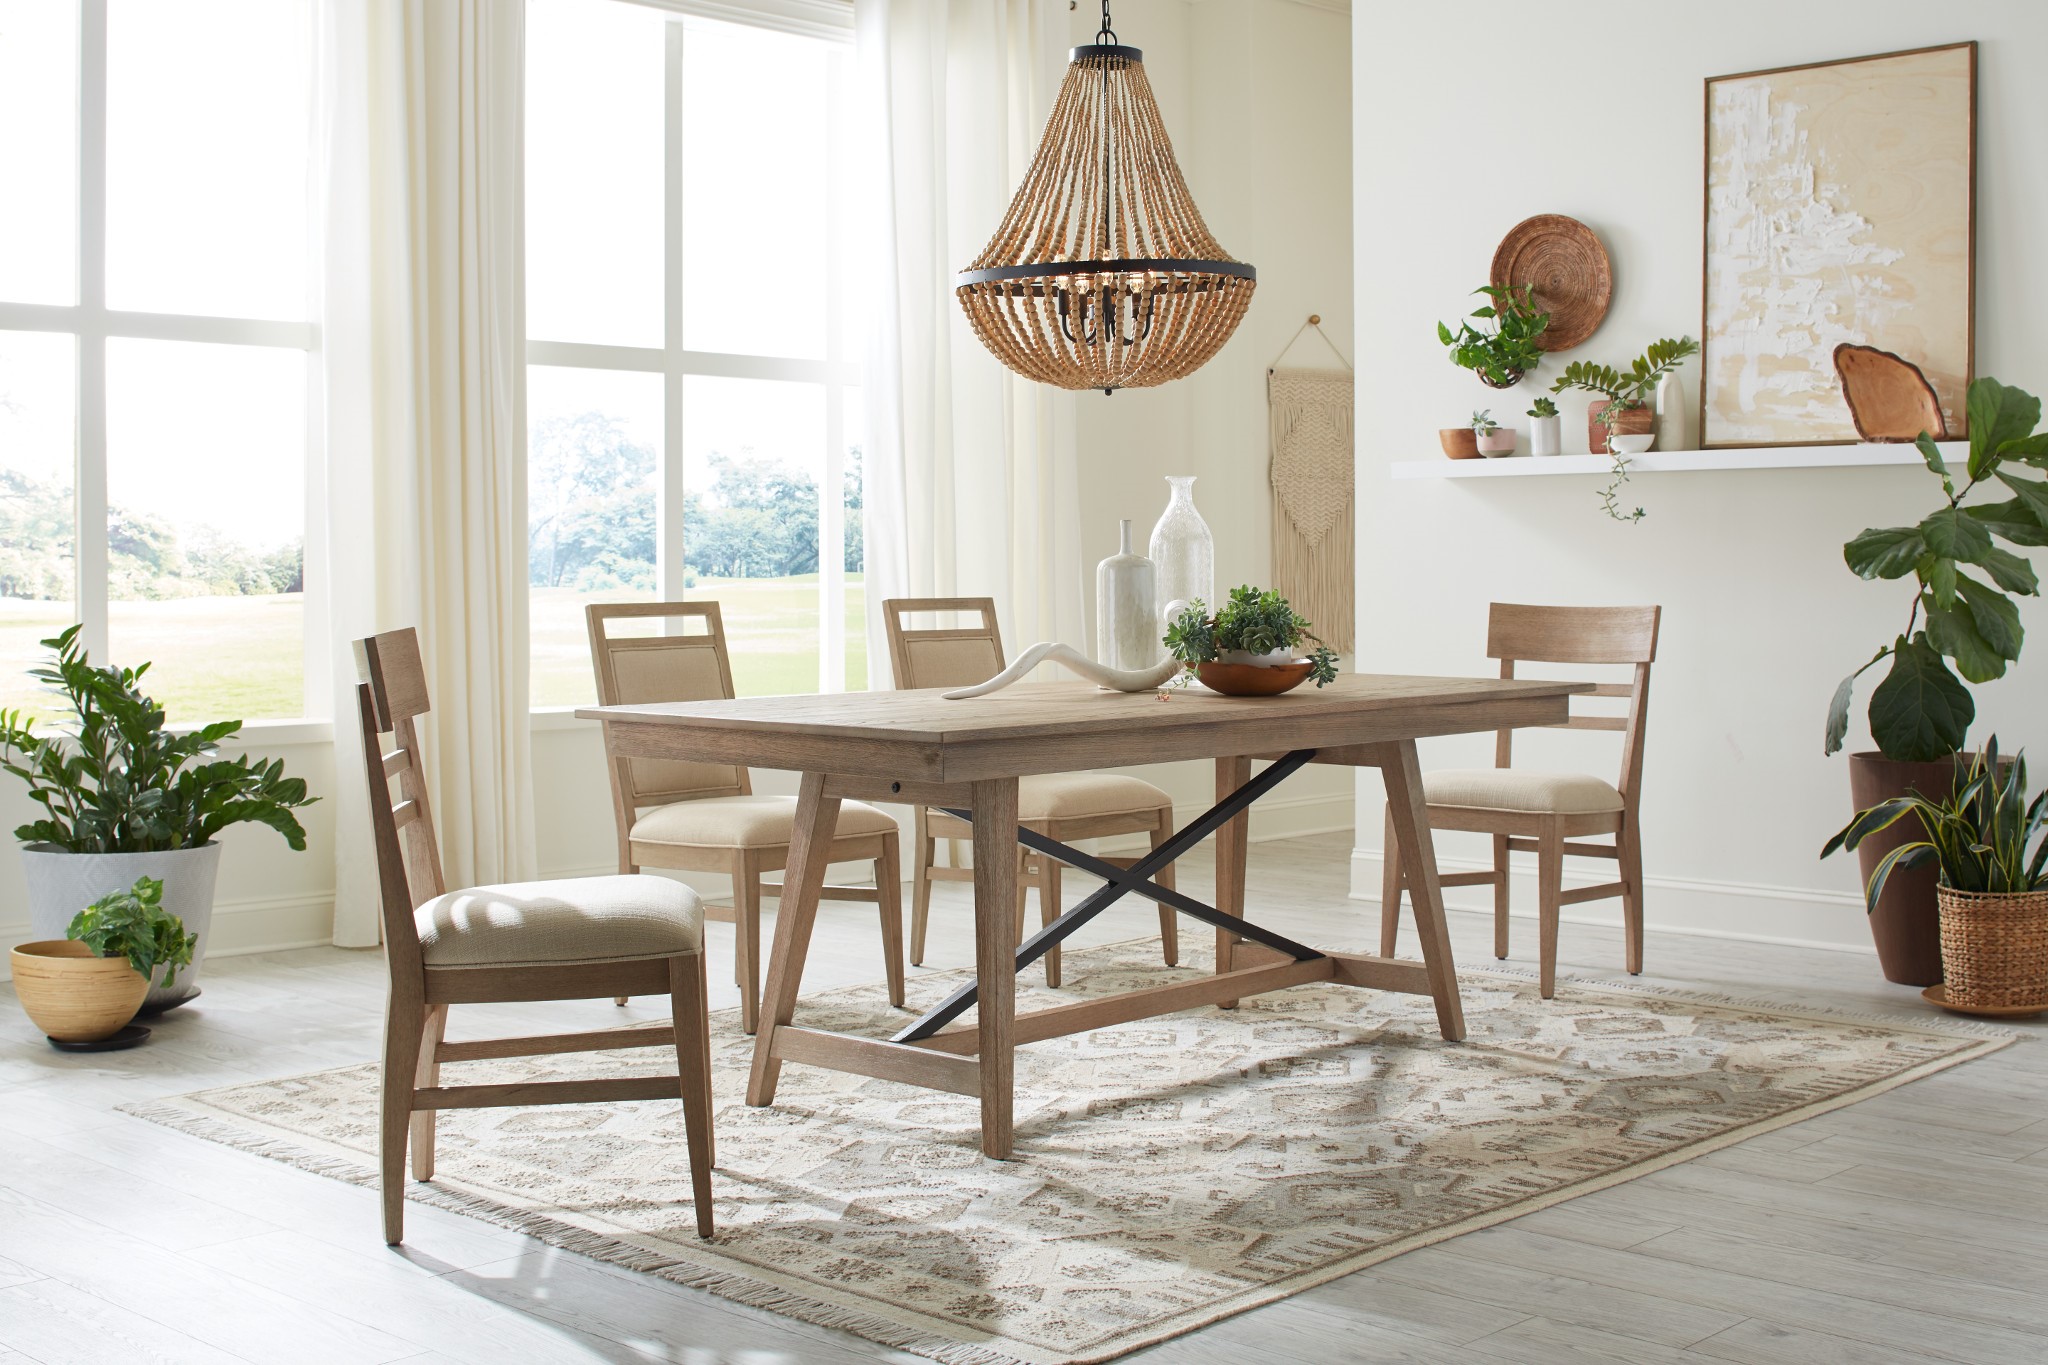 updating your dining room chairs